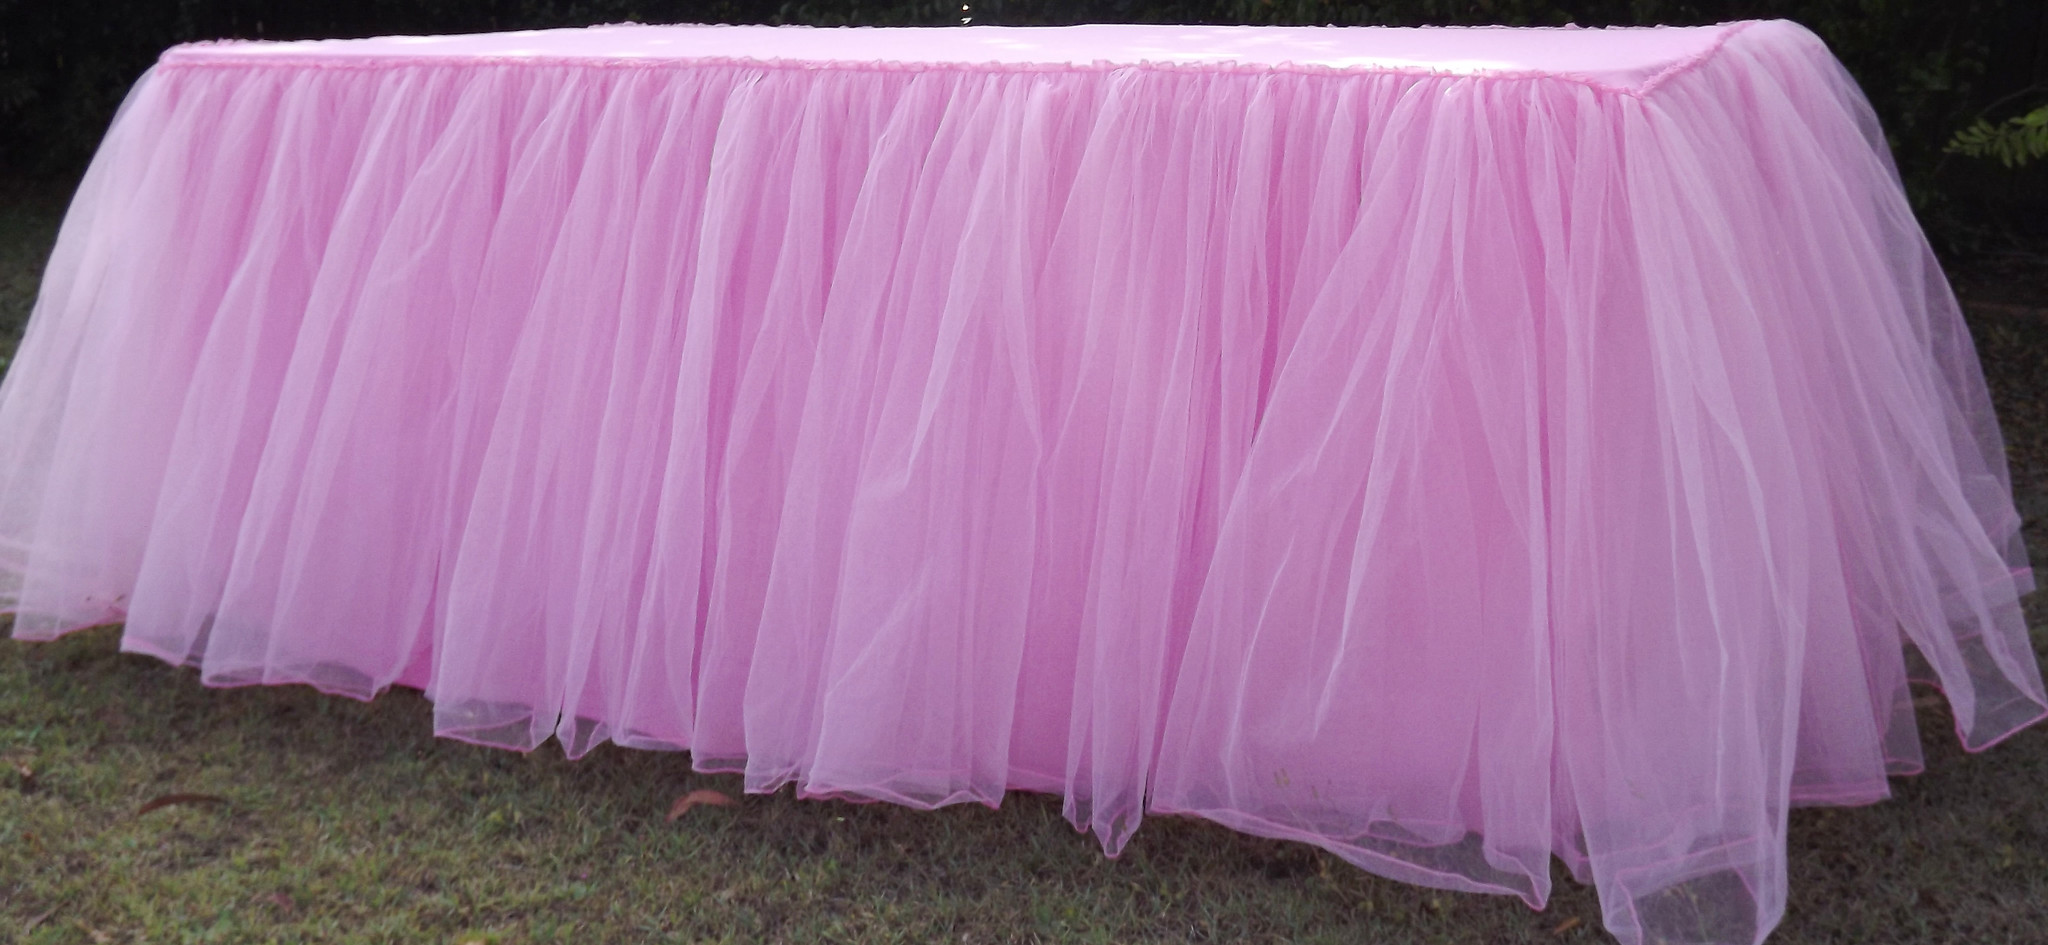 Tulle tablecloth - Saffy and May